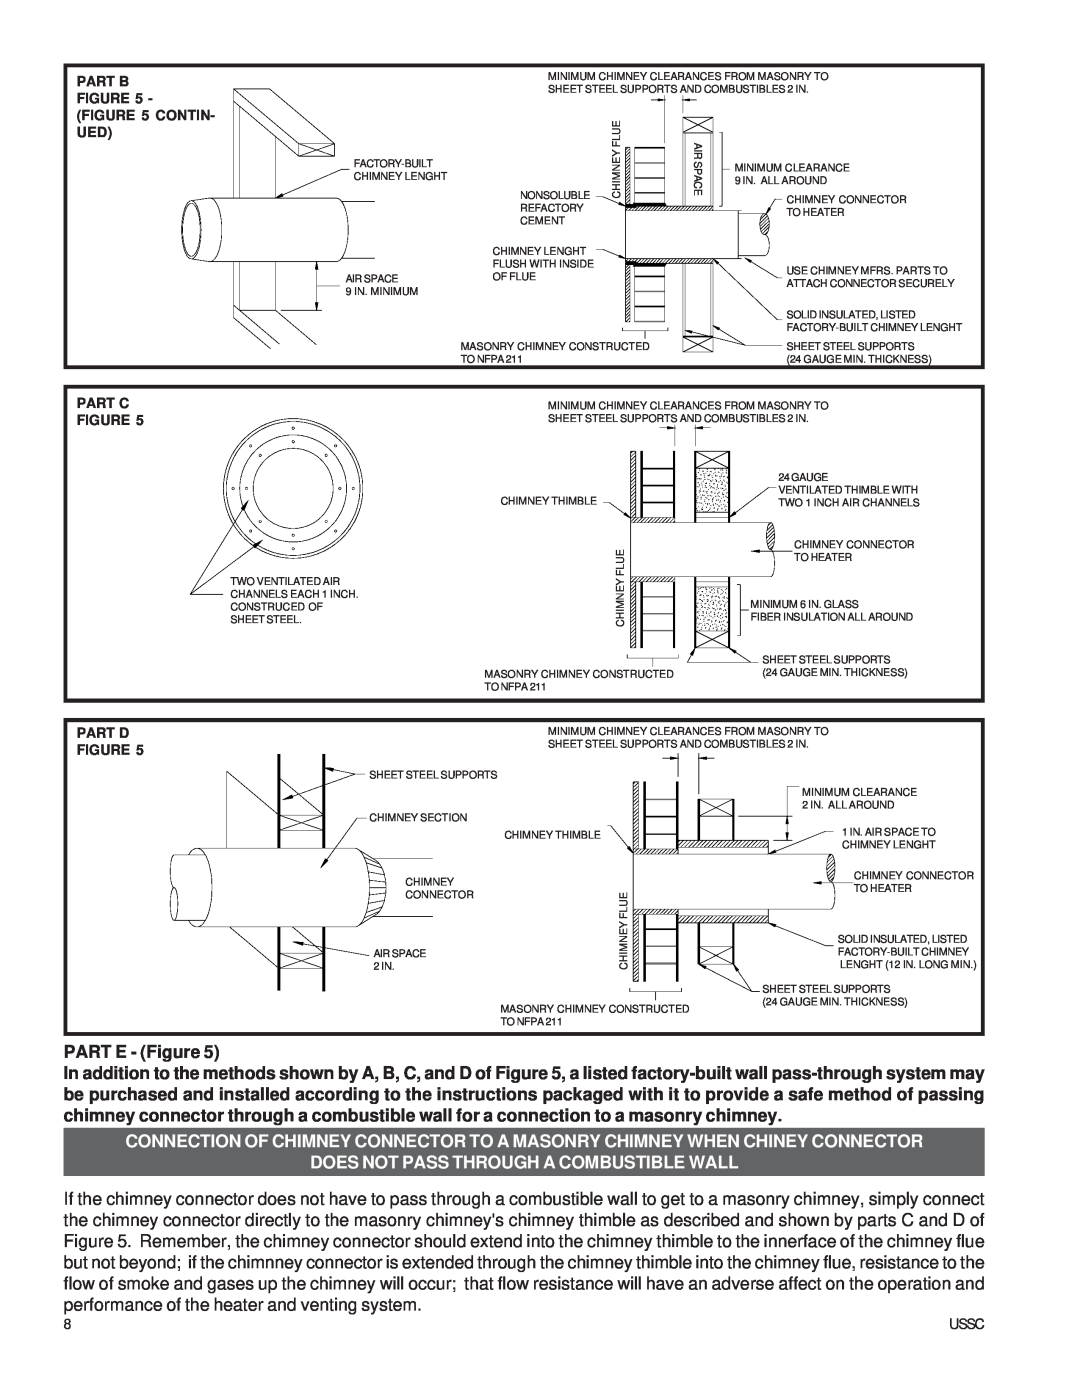 United States Stove ASA7 Does Not Pass Through A Combustible Wall, Part B - Contin, Part C Figure, Part D Figure, Ussc 